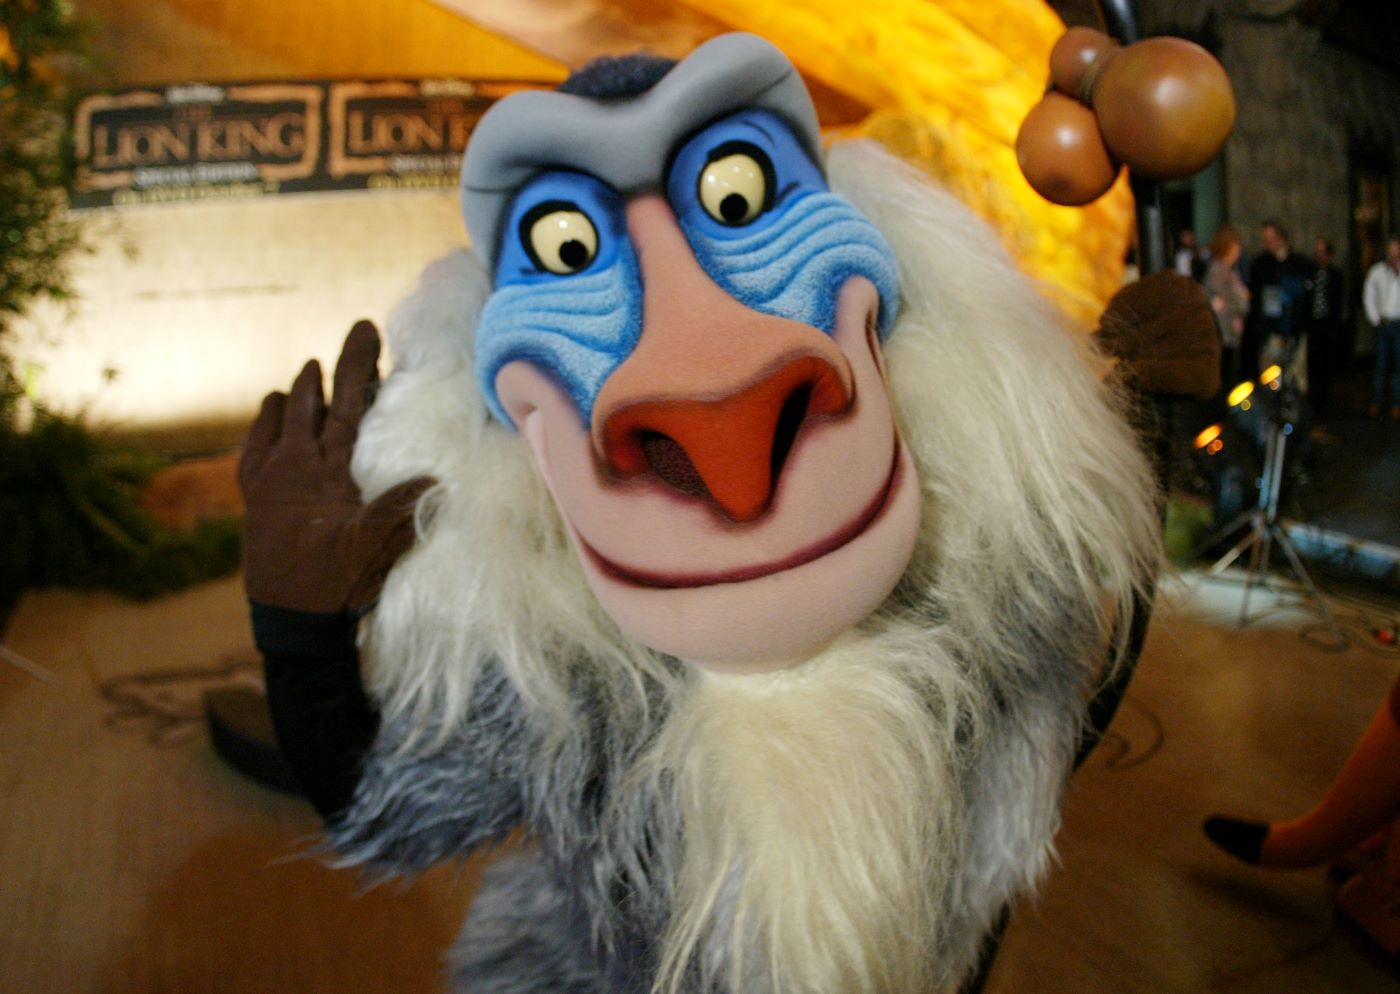 A close up of Rafiki the monkey from 'The Lion King' with a slightly blurred background that has an orangish tint.